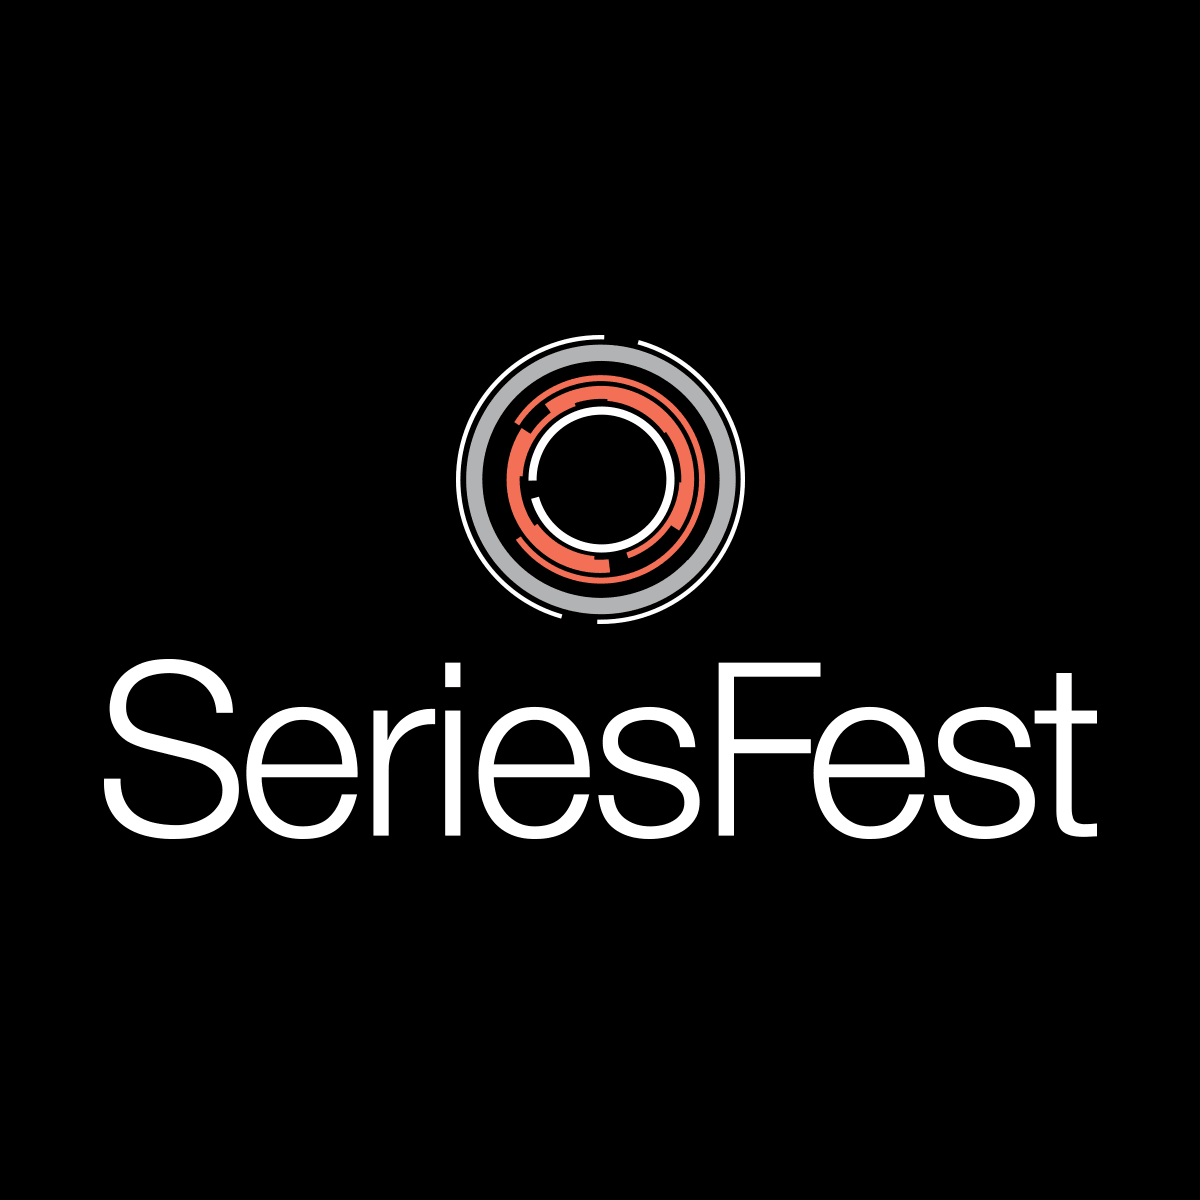 "Early To Rise" Selected for SeriesFest 2020